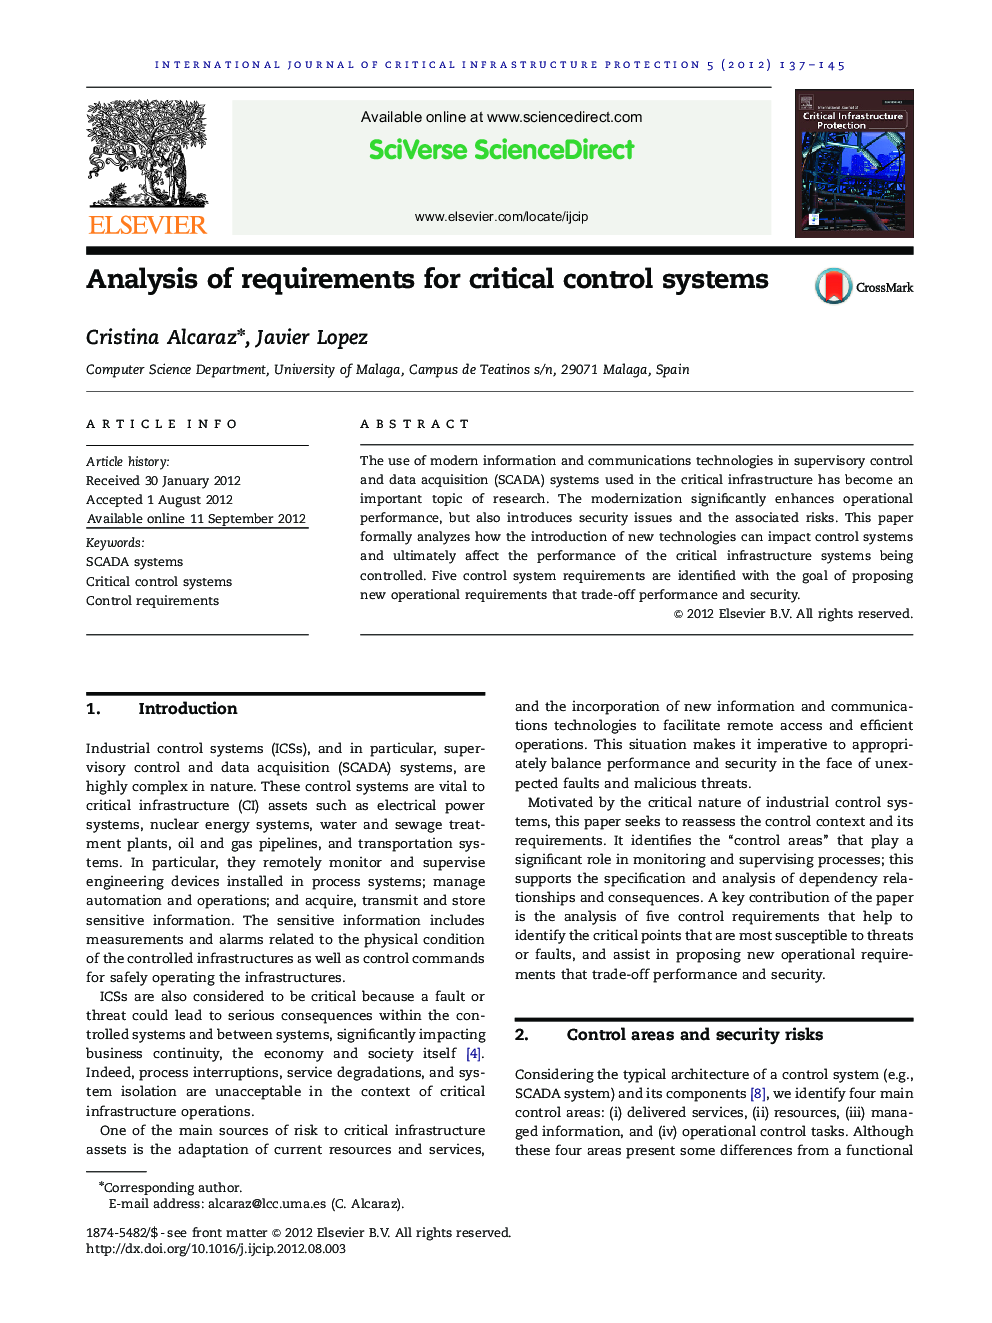 Analysis of requirements for critical control systems